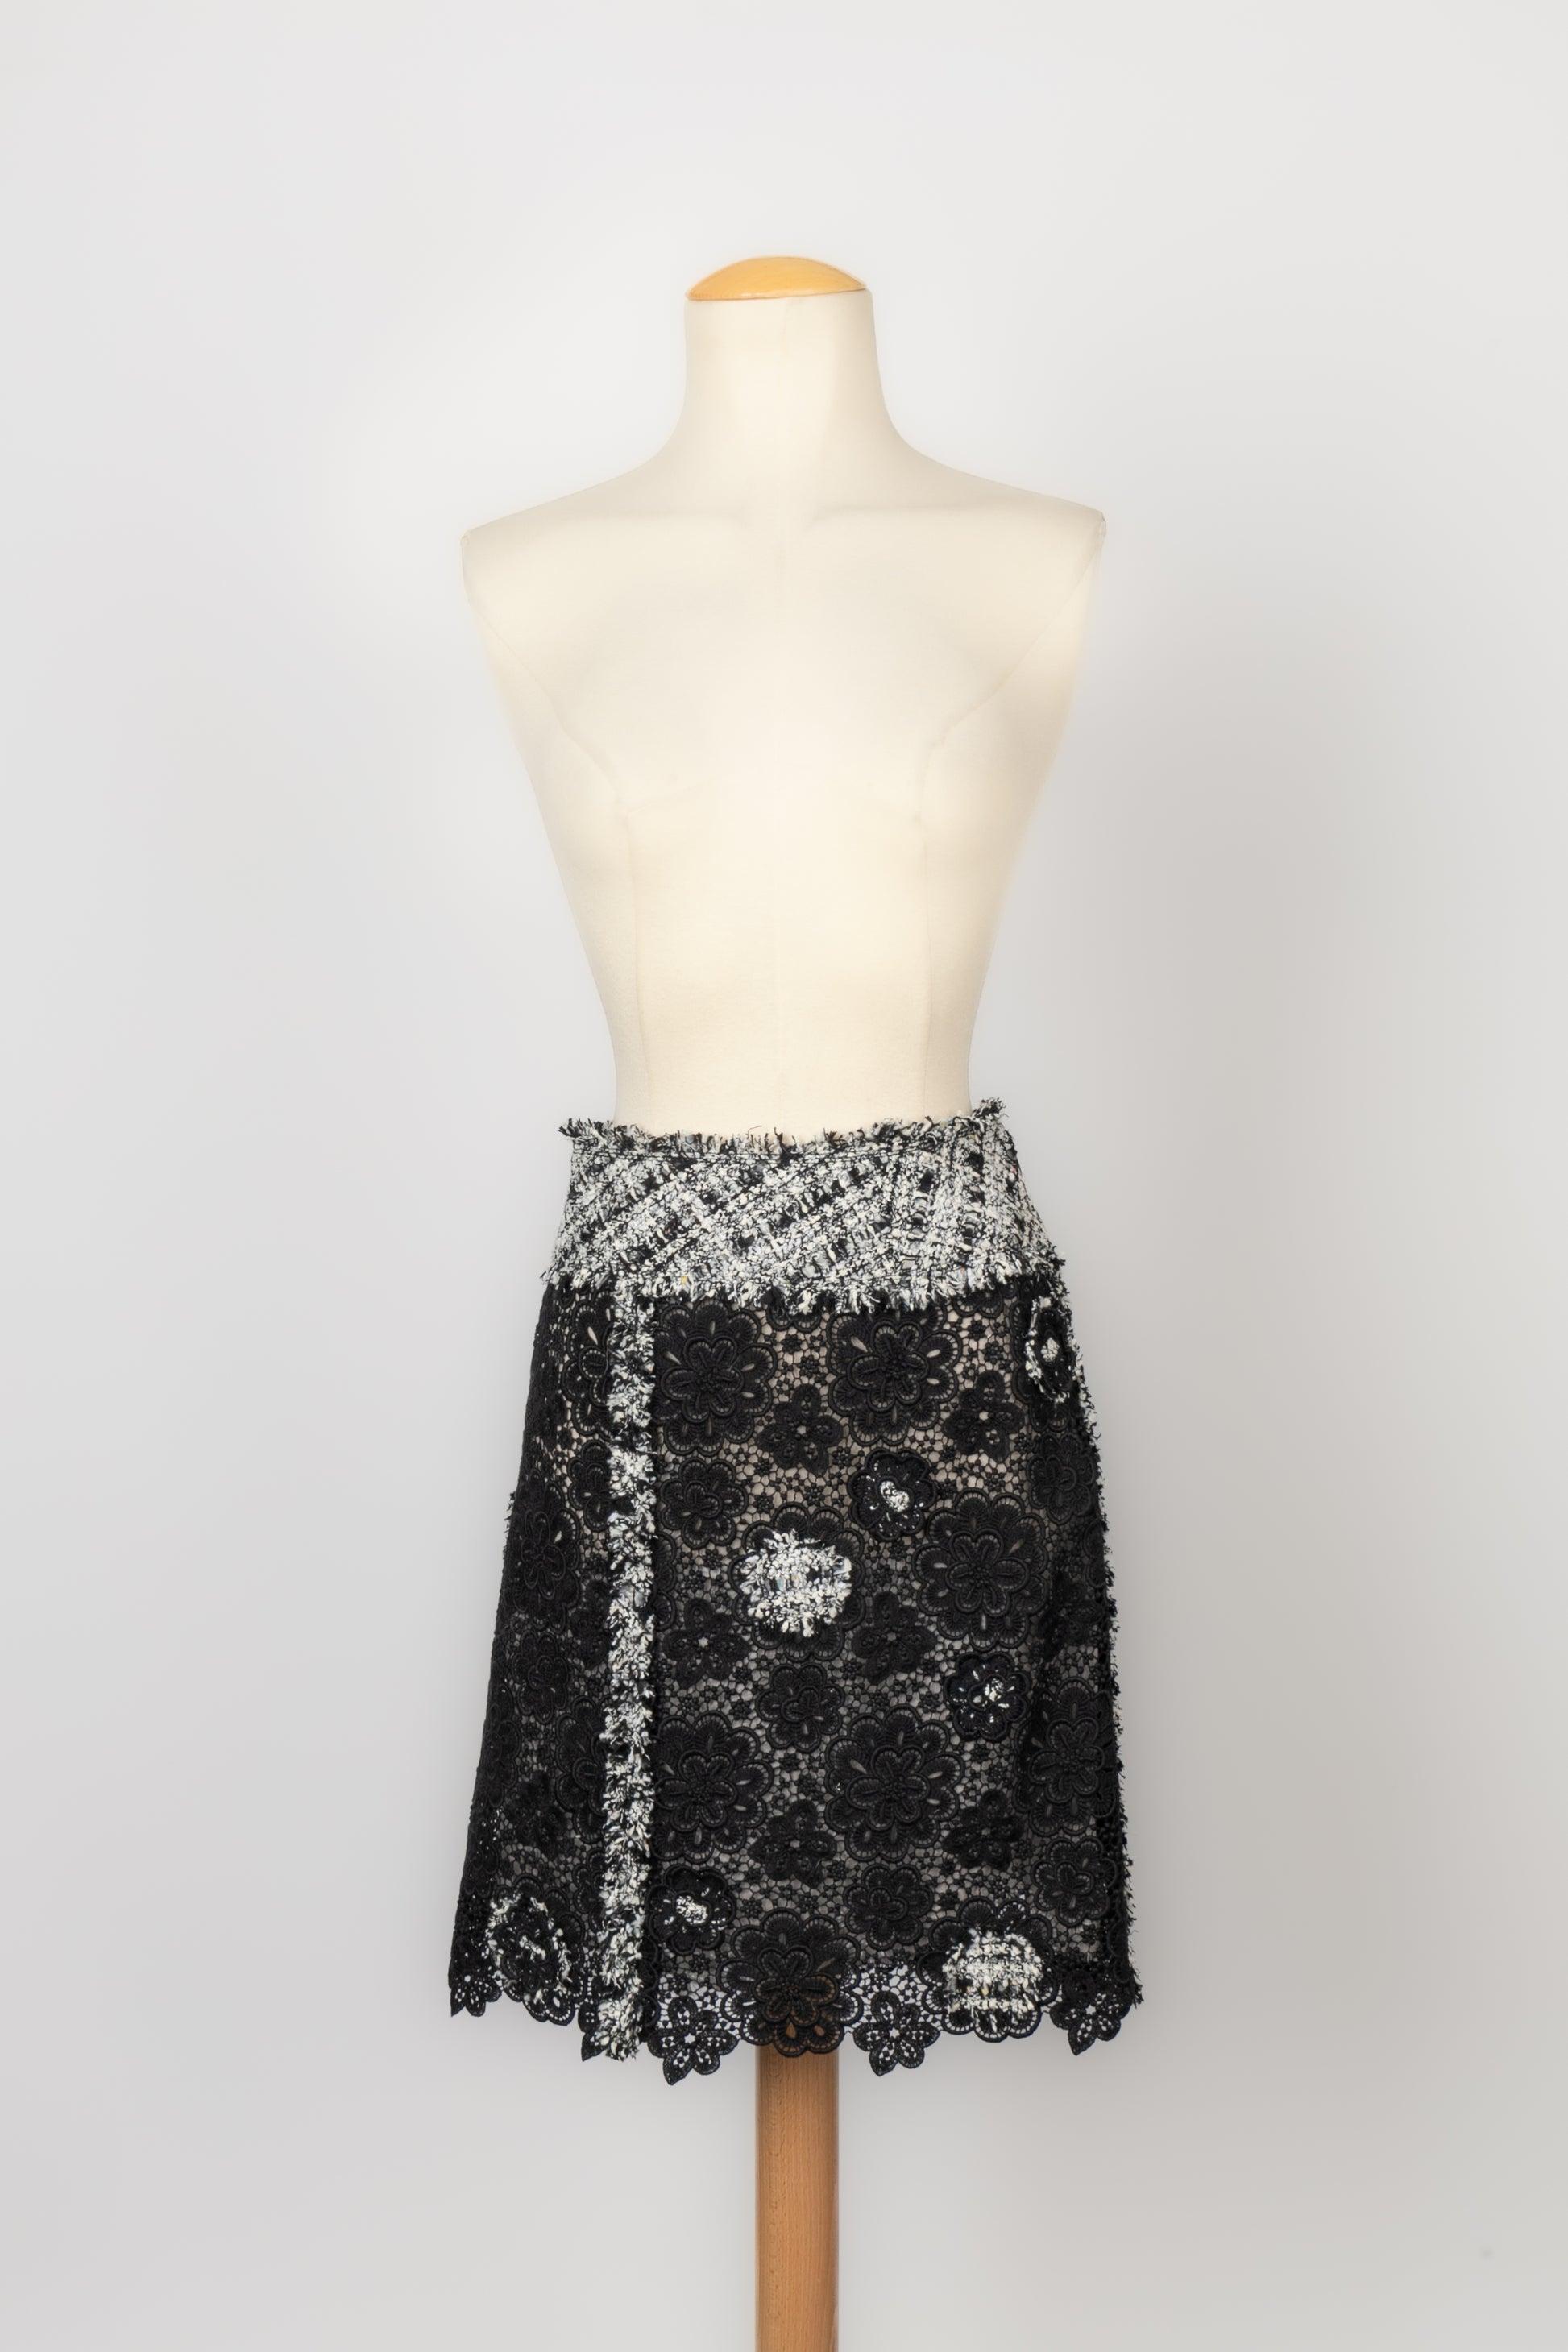 Chanel Black Lace Set Edged with Braids, 2004 For Sale 6